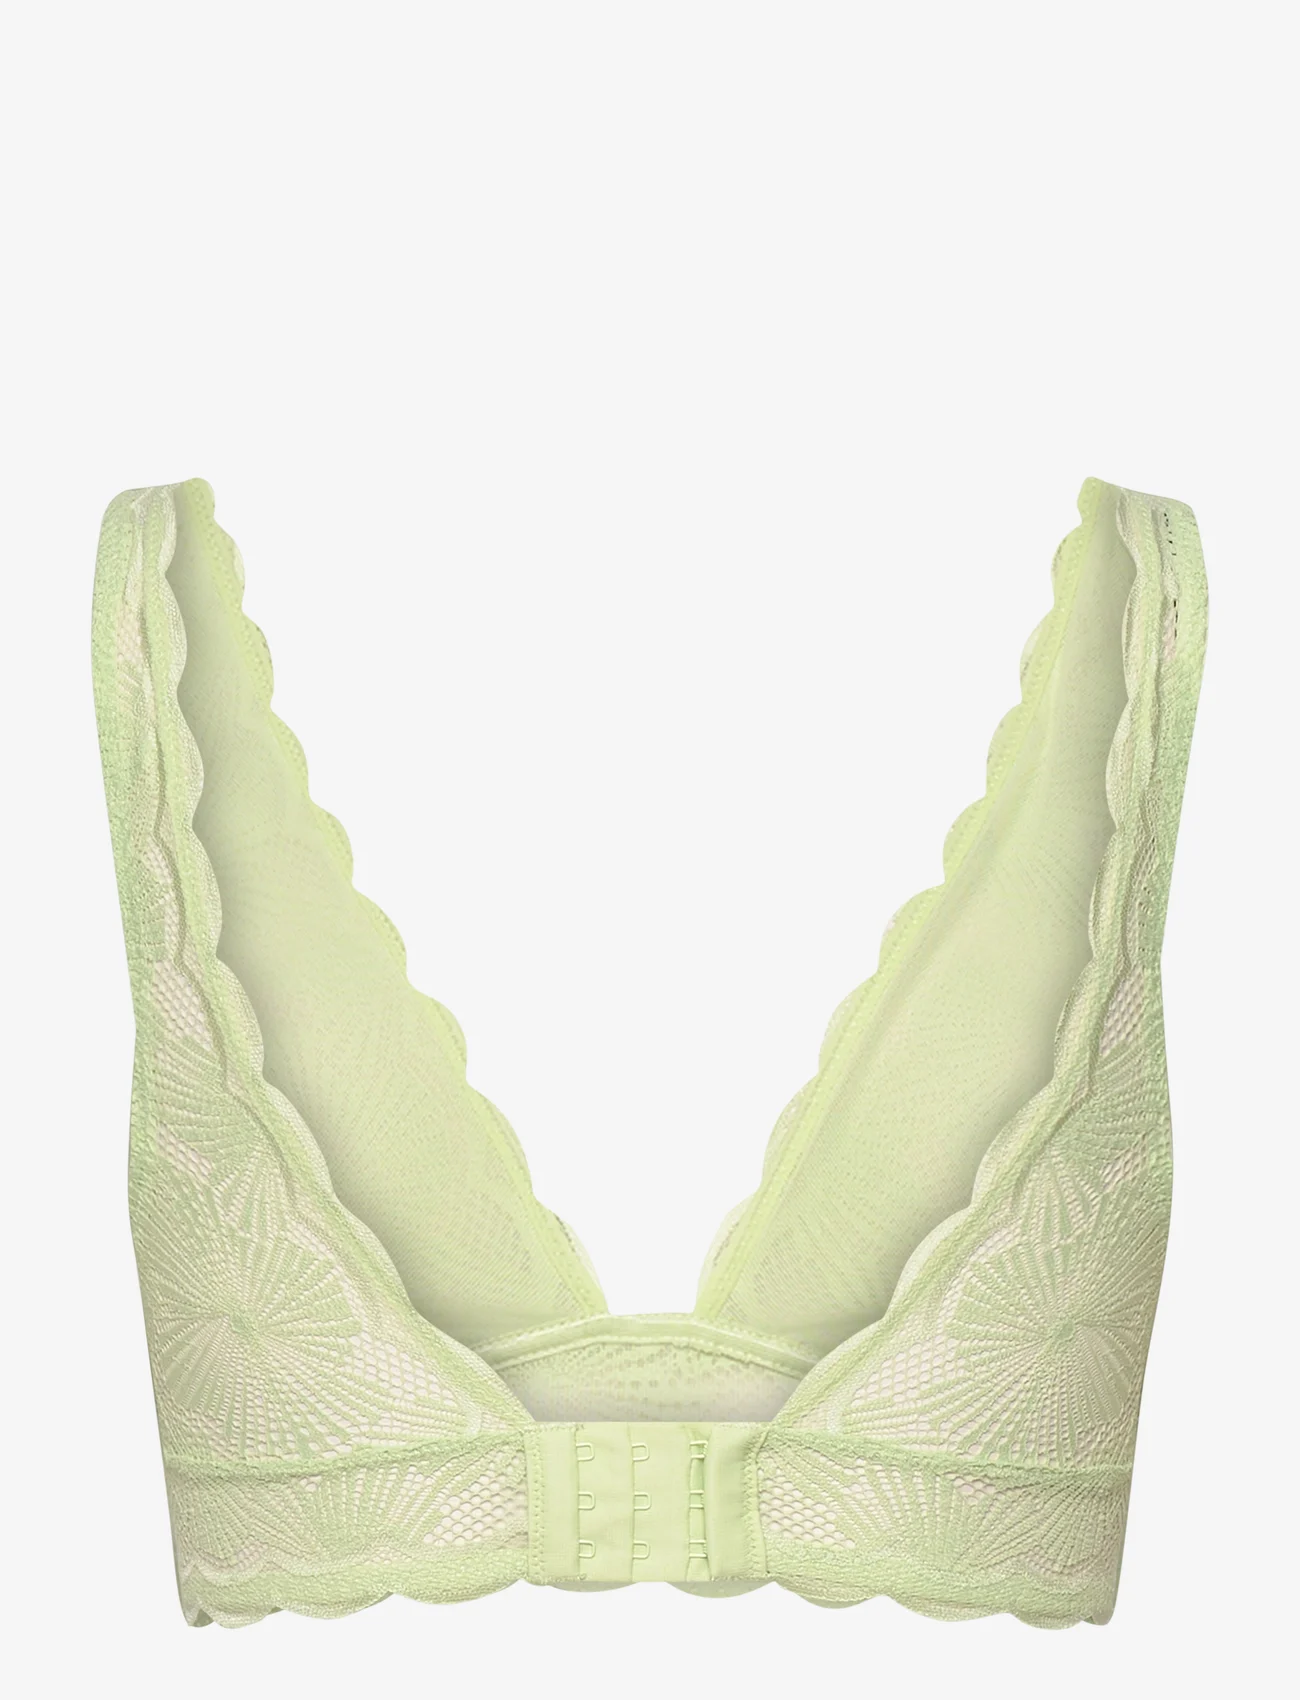 Esprit Bodywear Women - Non-padded, non-wired bra made of patterned lace - bralette-rintaliivit - light green - 1